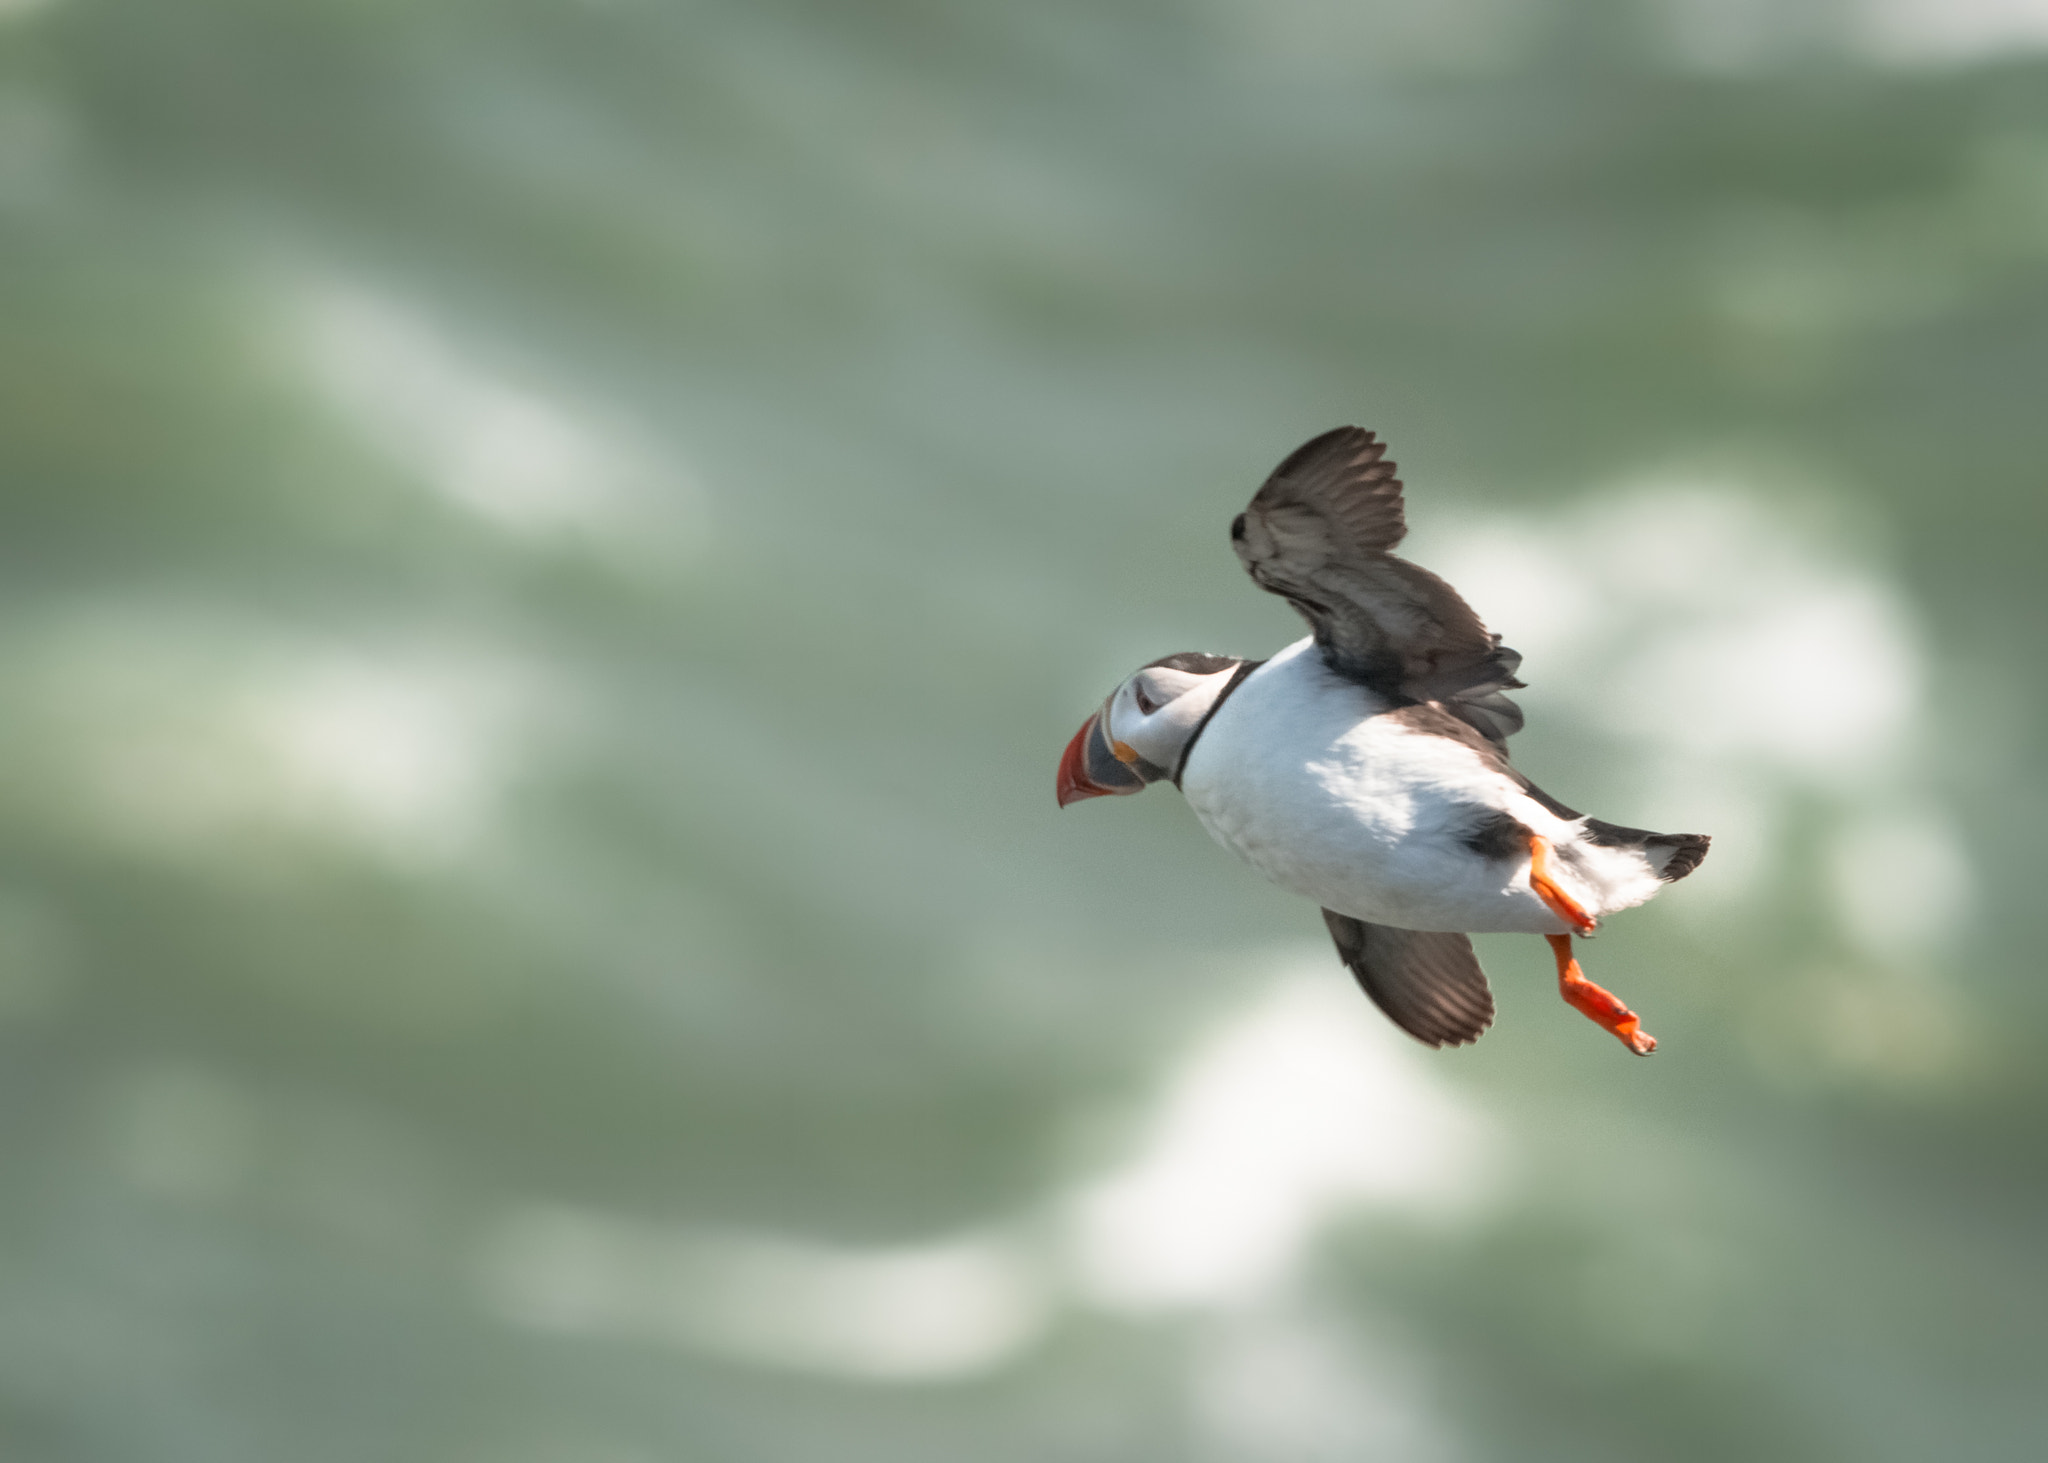 Nikon D800 sample photo. Puffin flying photography